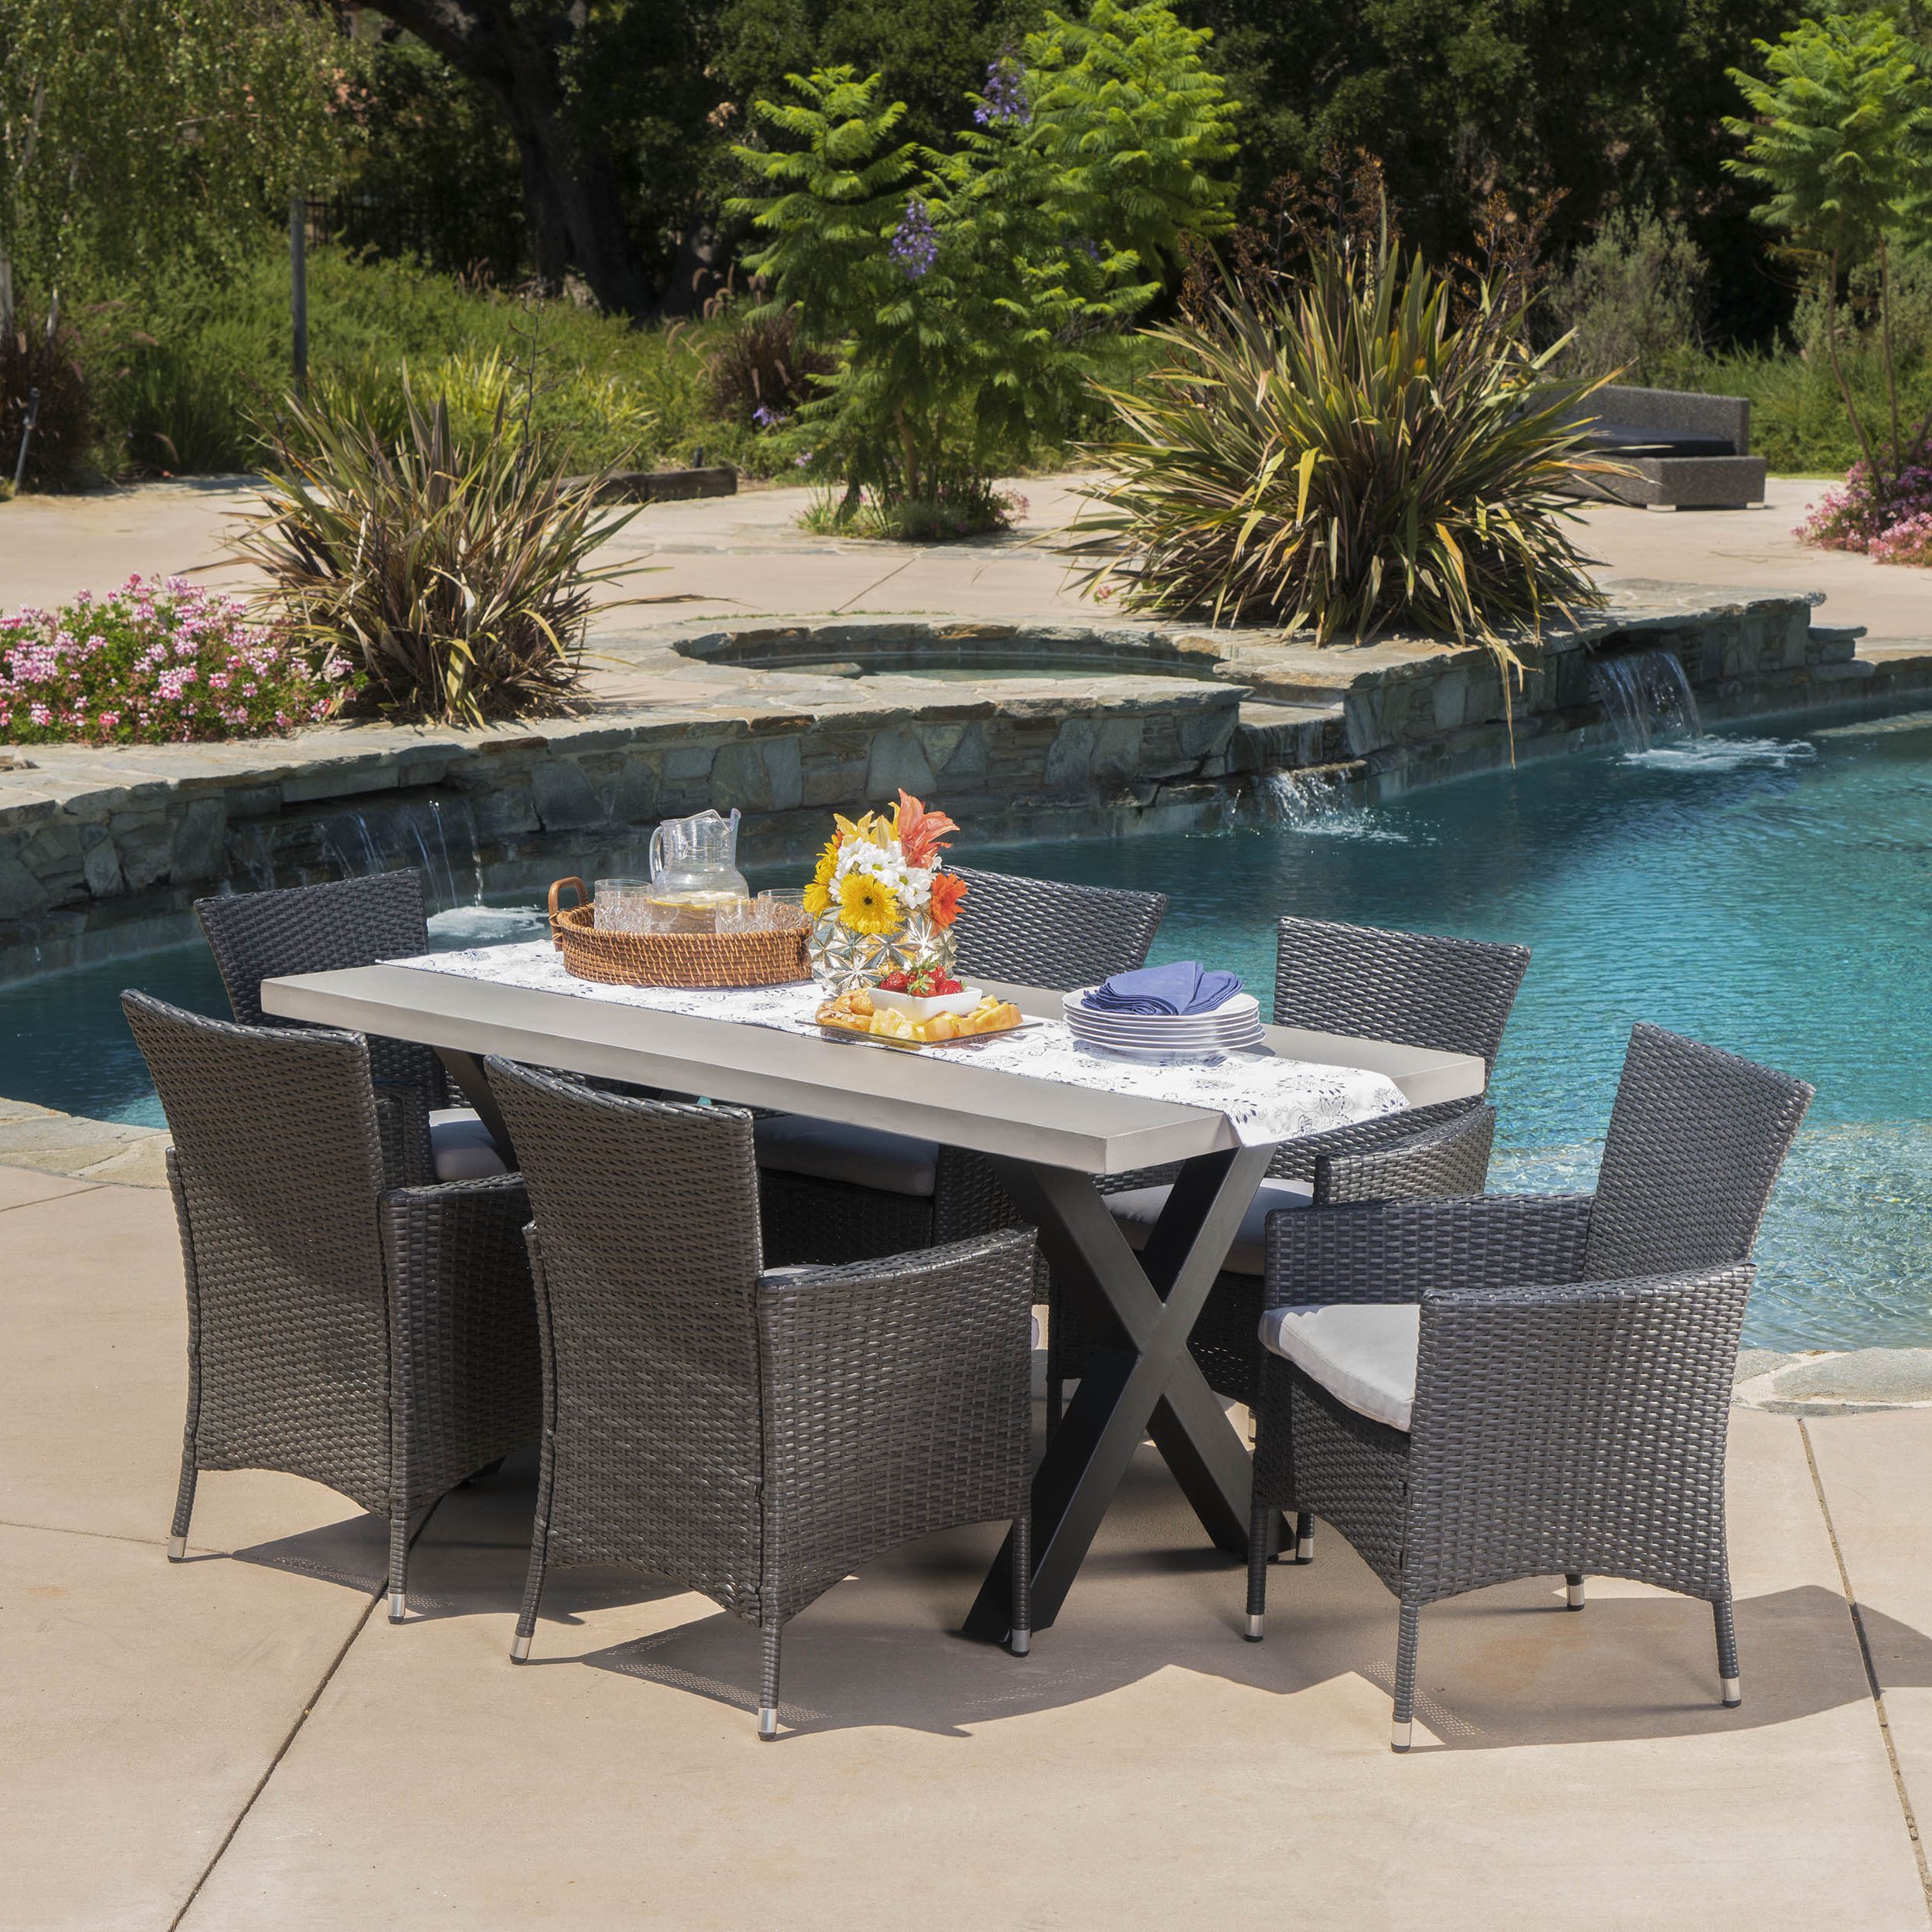 Shiloh Outdoor 7 Piece Dining Set With Concrete Rectangular Table And Intended For Widely Used Rectangular 7 Piece Patio Dining Sets (View 5 of 15)